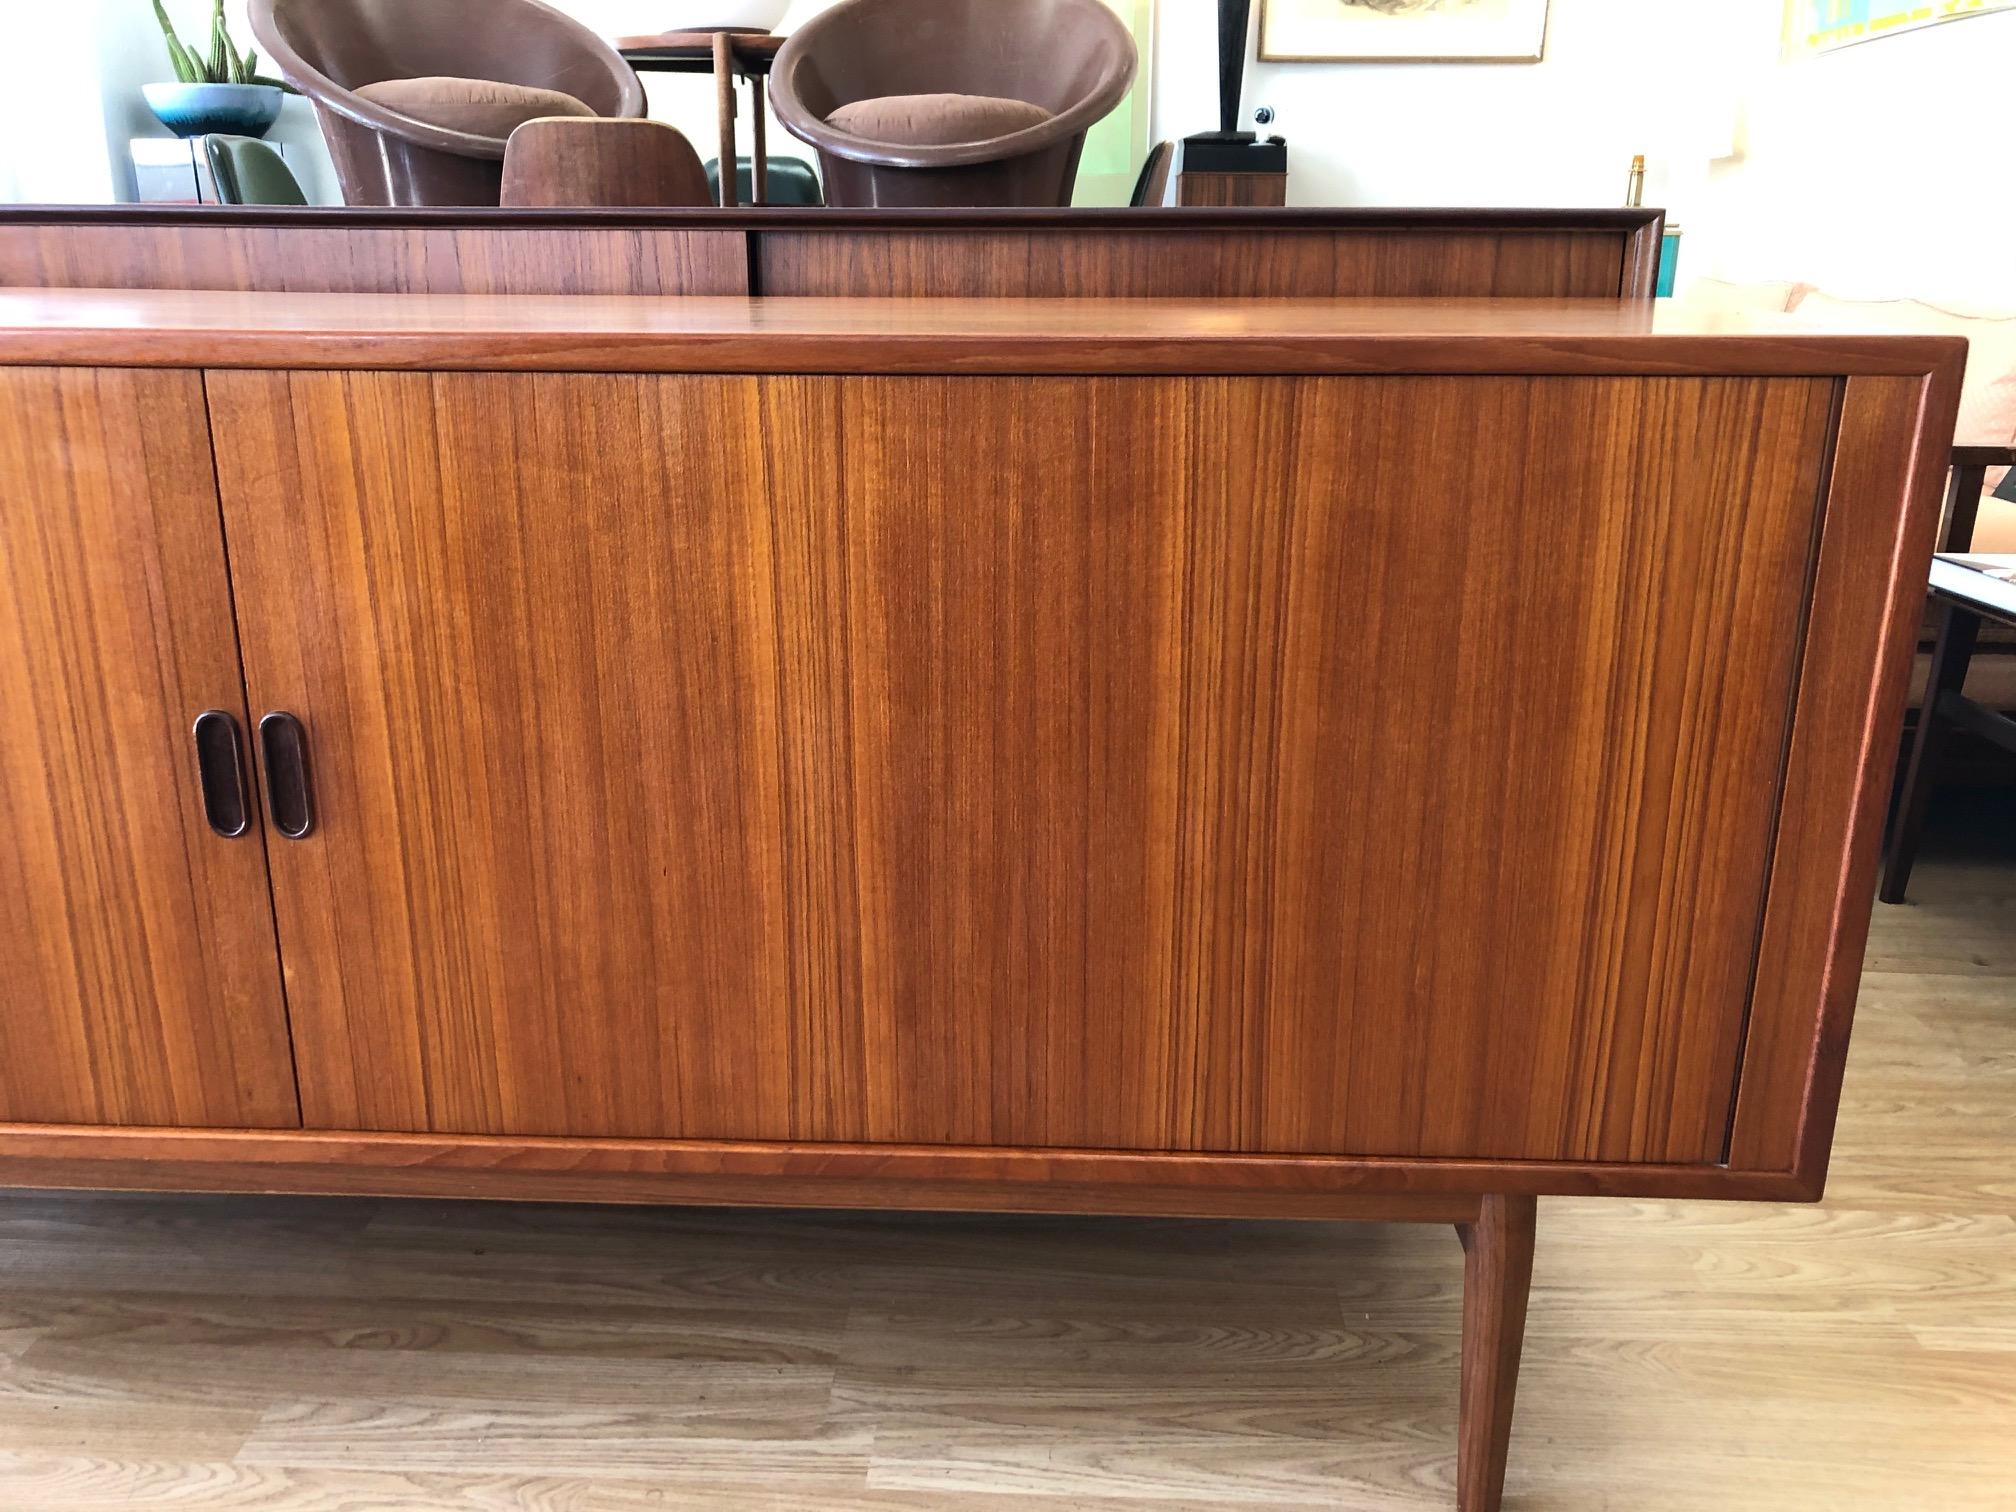 This beautifully crafted vintage credenza by Arne Vodder is in overall good condition. Teak wood. Sliding tambour doors. Interior adjustable shelving and two drawers. Label inside. (See photos),
circa 1960s, Denmark.
Dimensions:
31.5